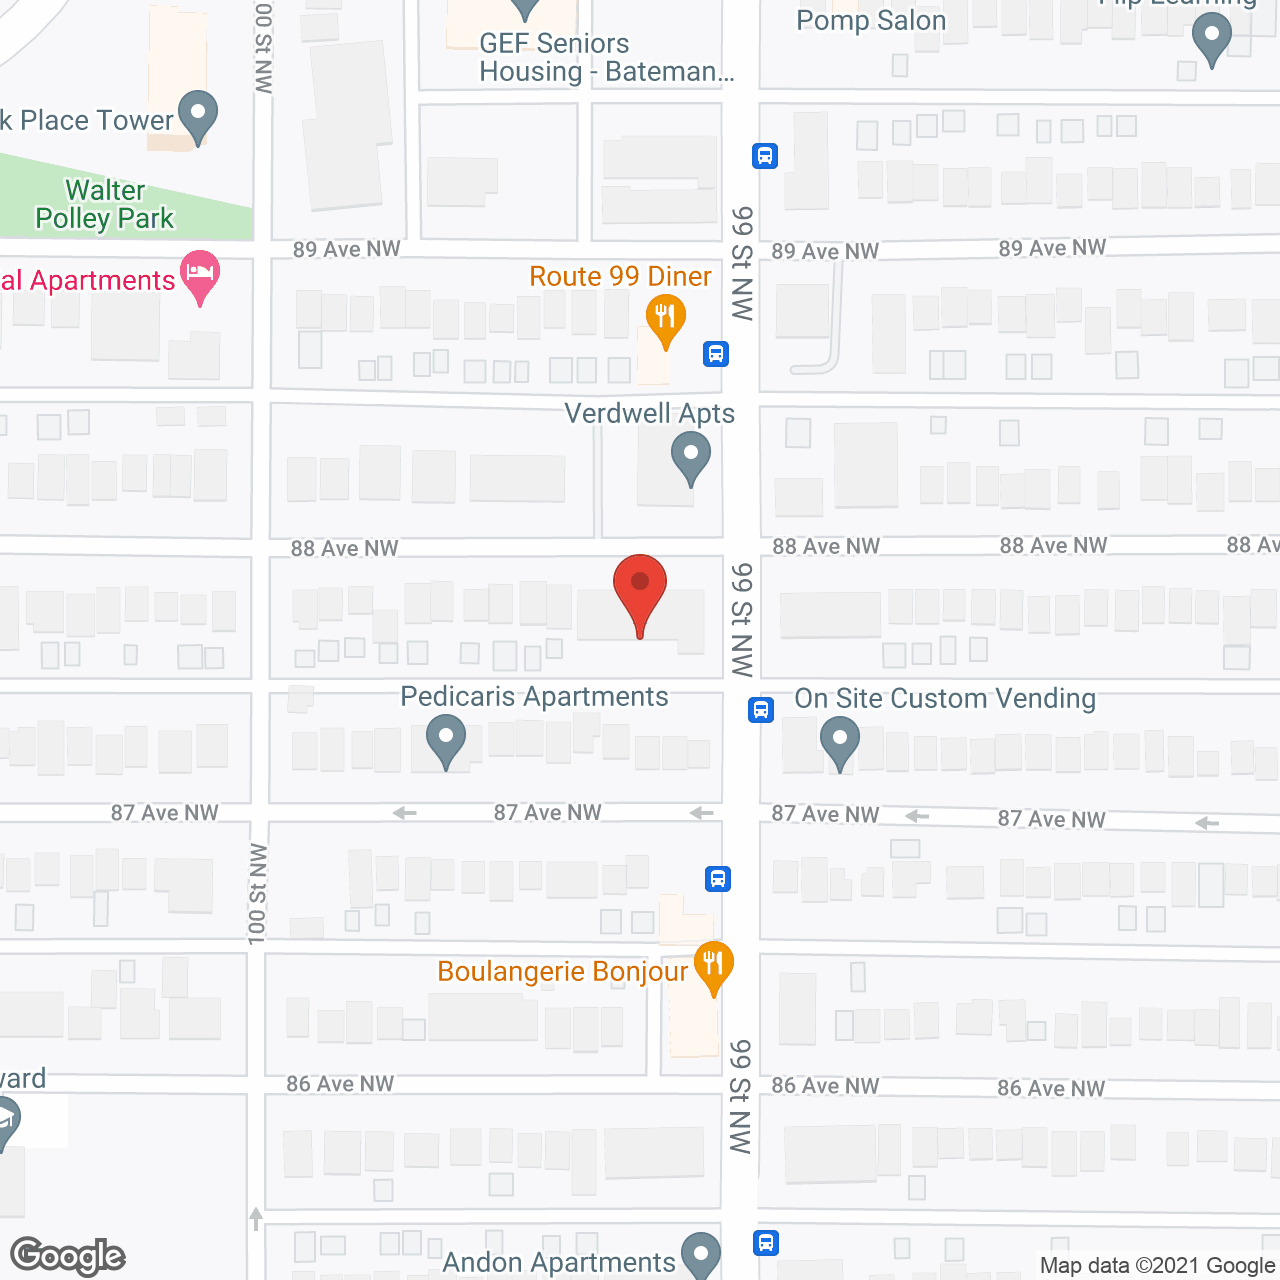 Queenland Apartments in google map